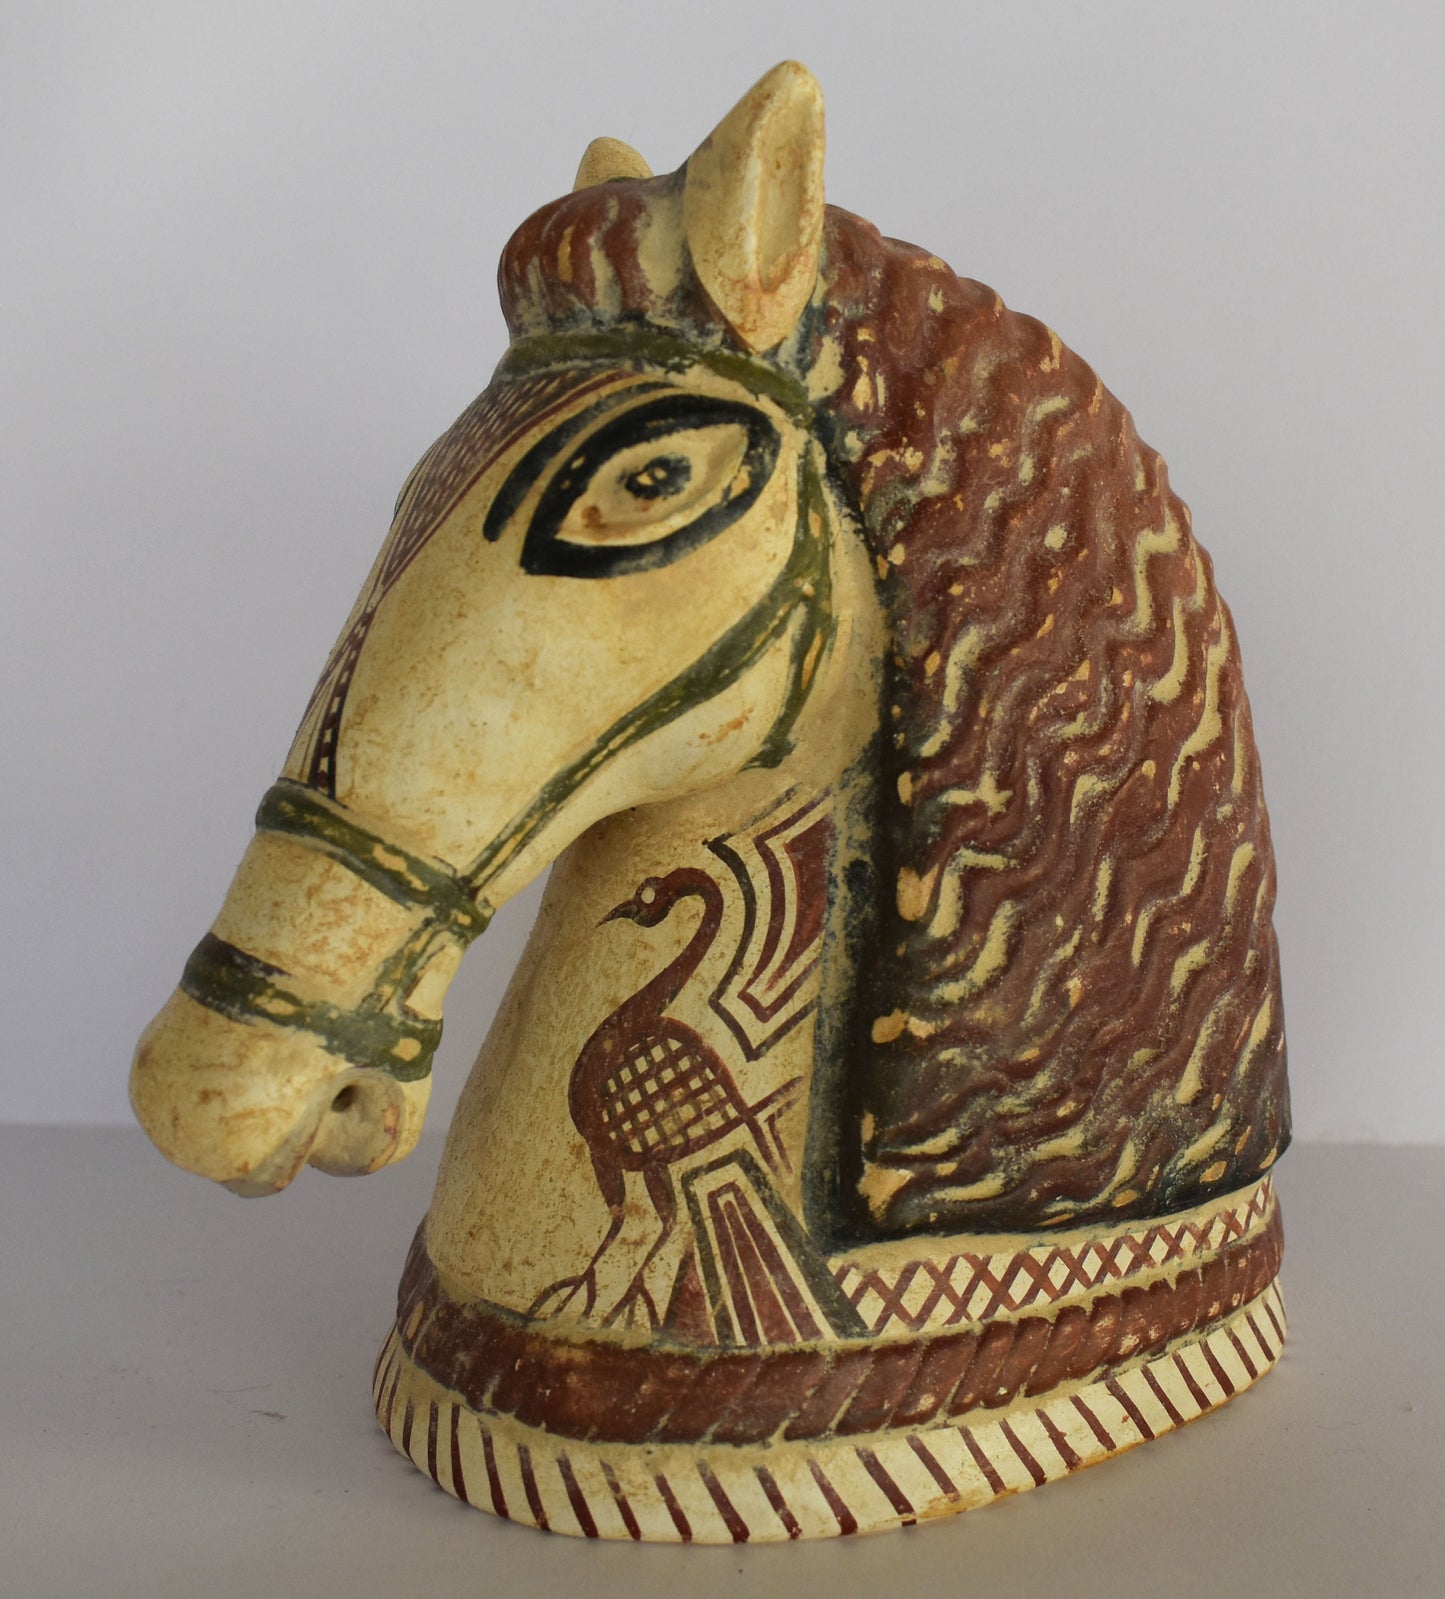 Horse Head - about 500 BC - Symbol of Wealth and Prosperity - Ceramic Artifact